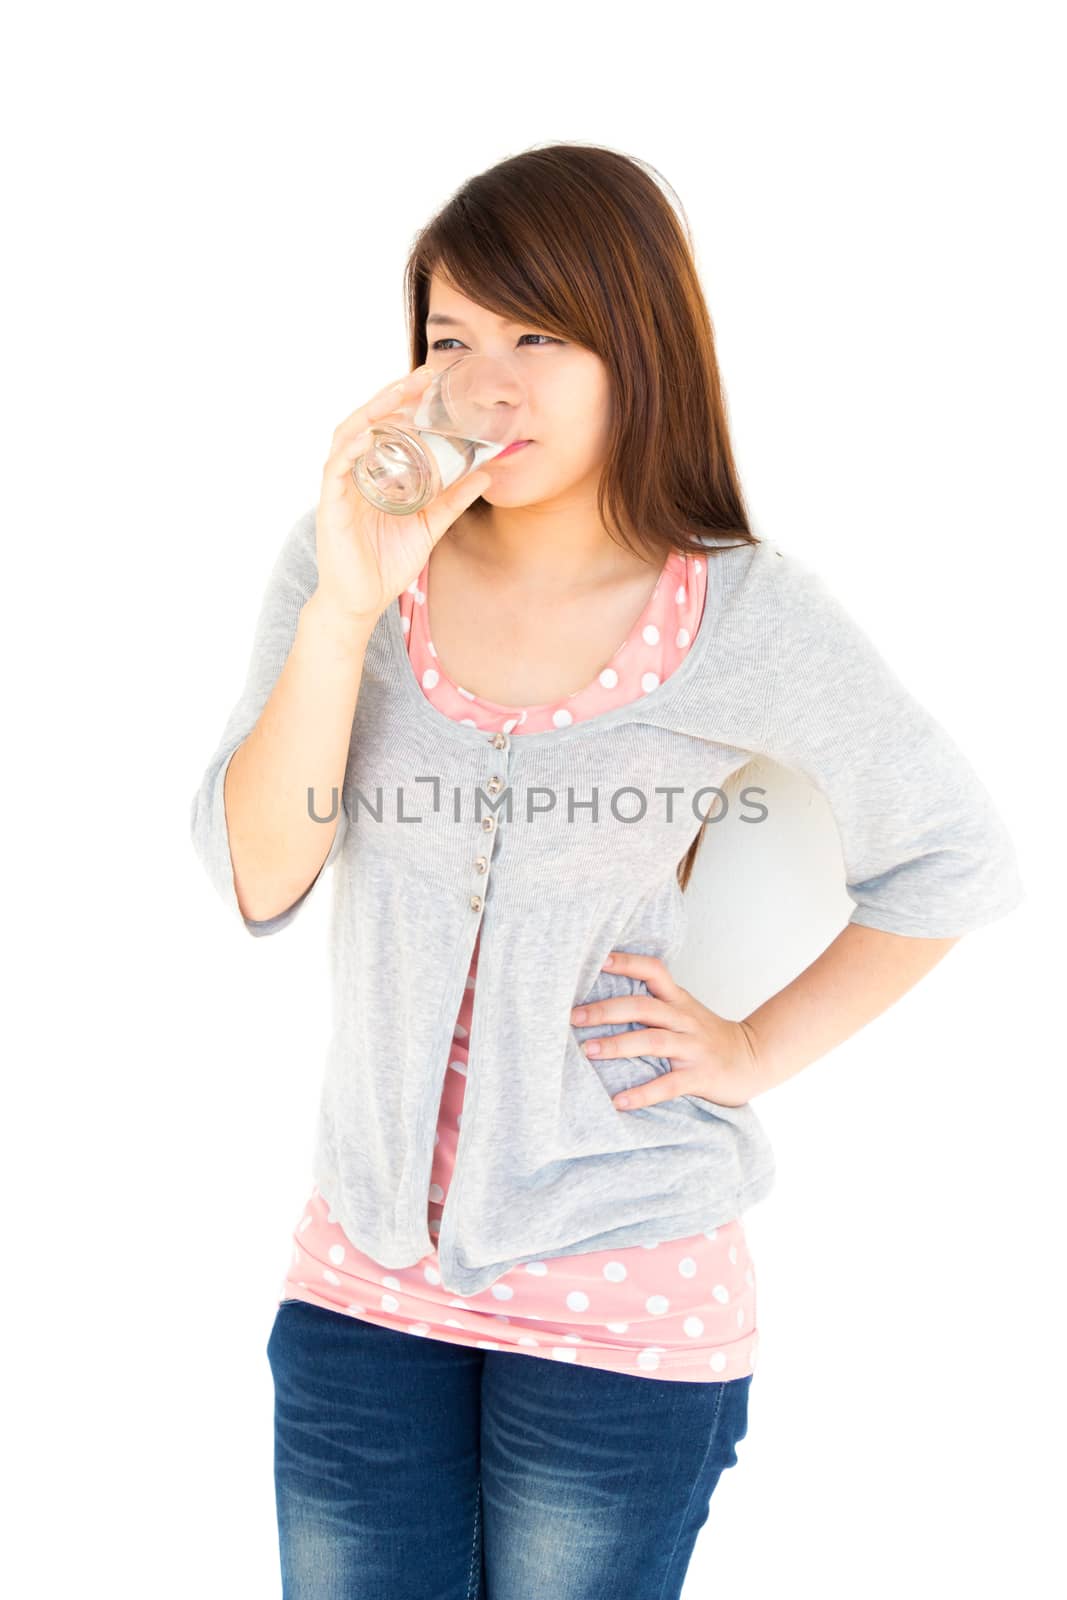 woman drink water by stockdevil